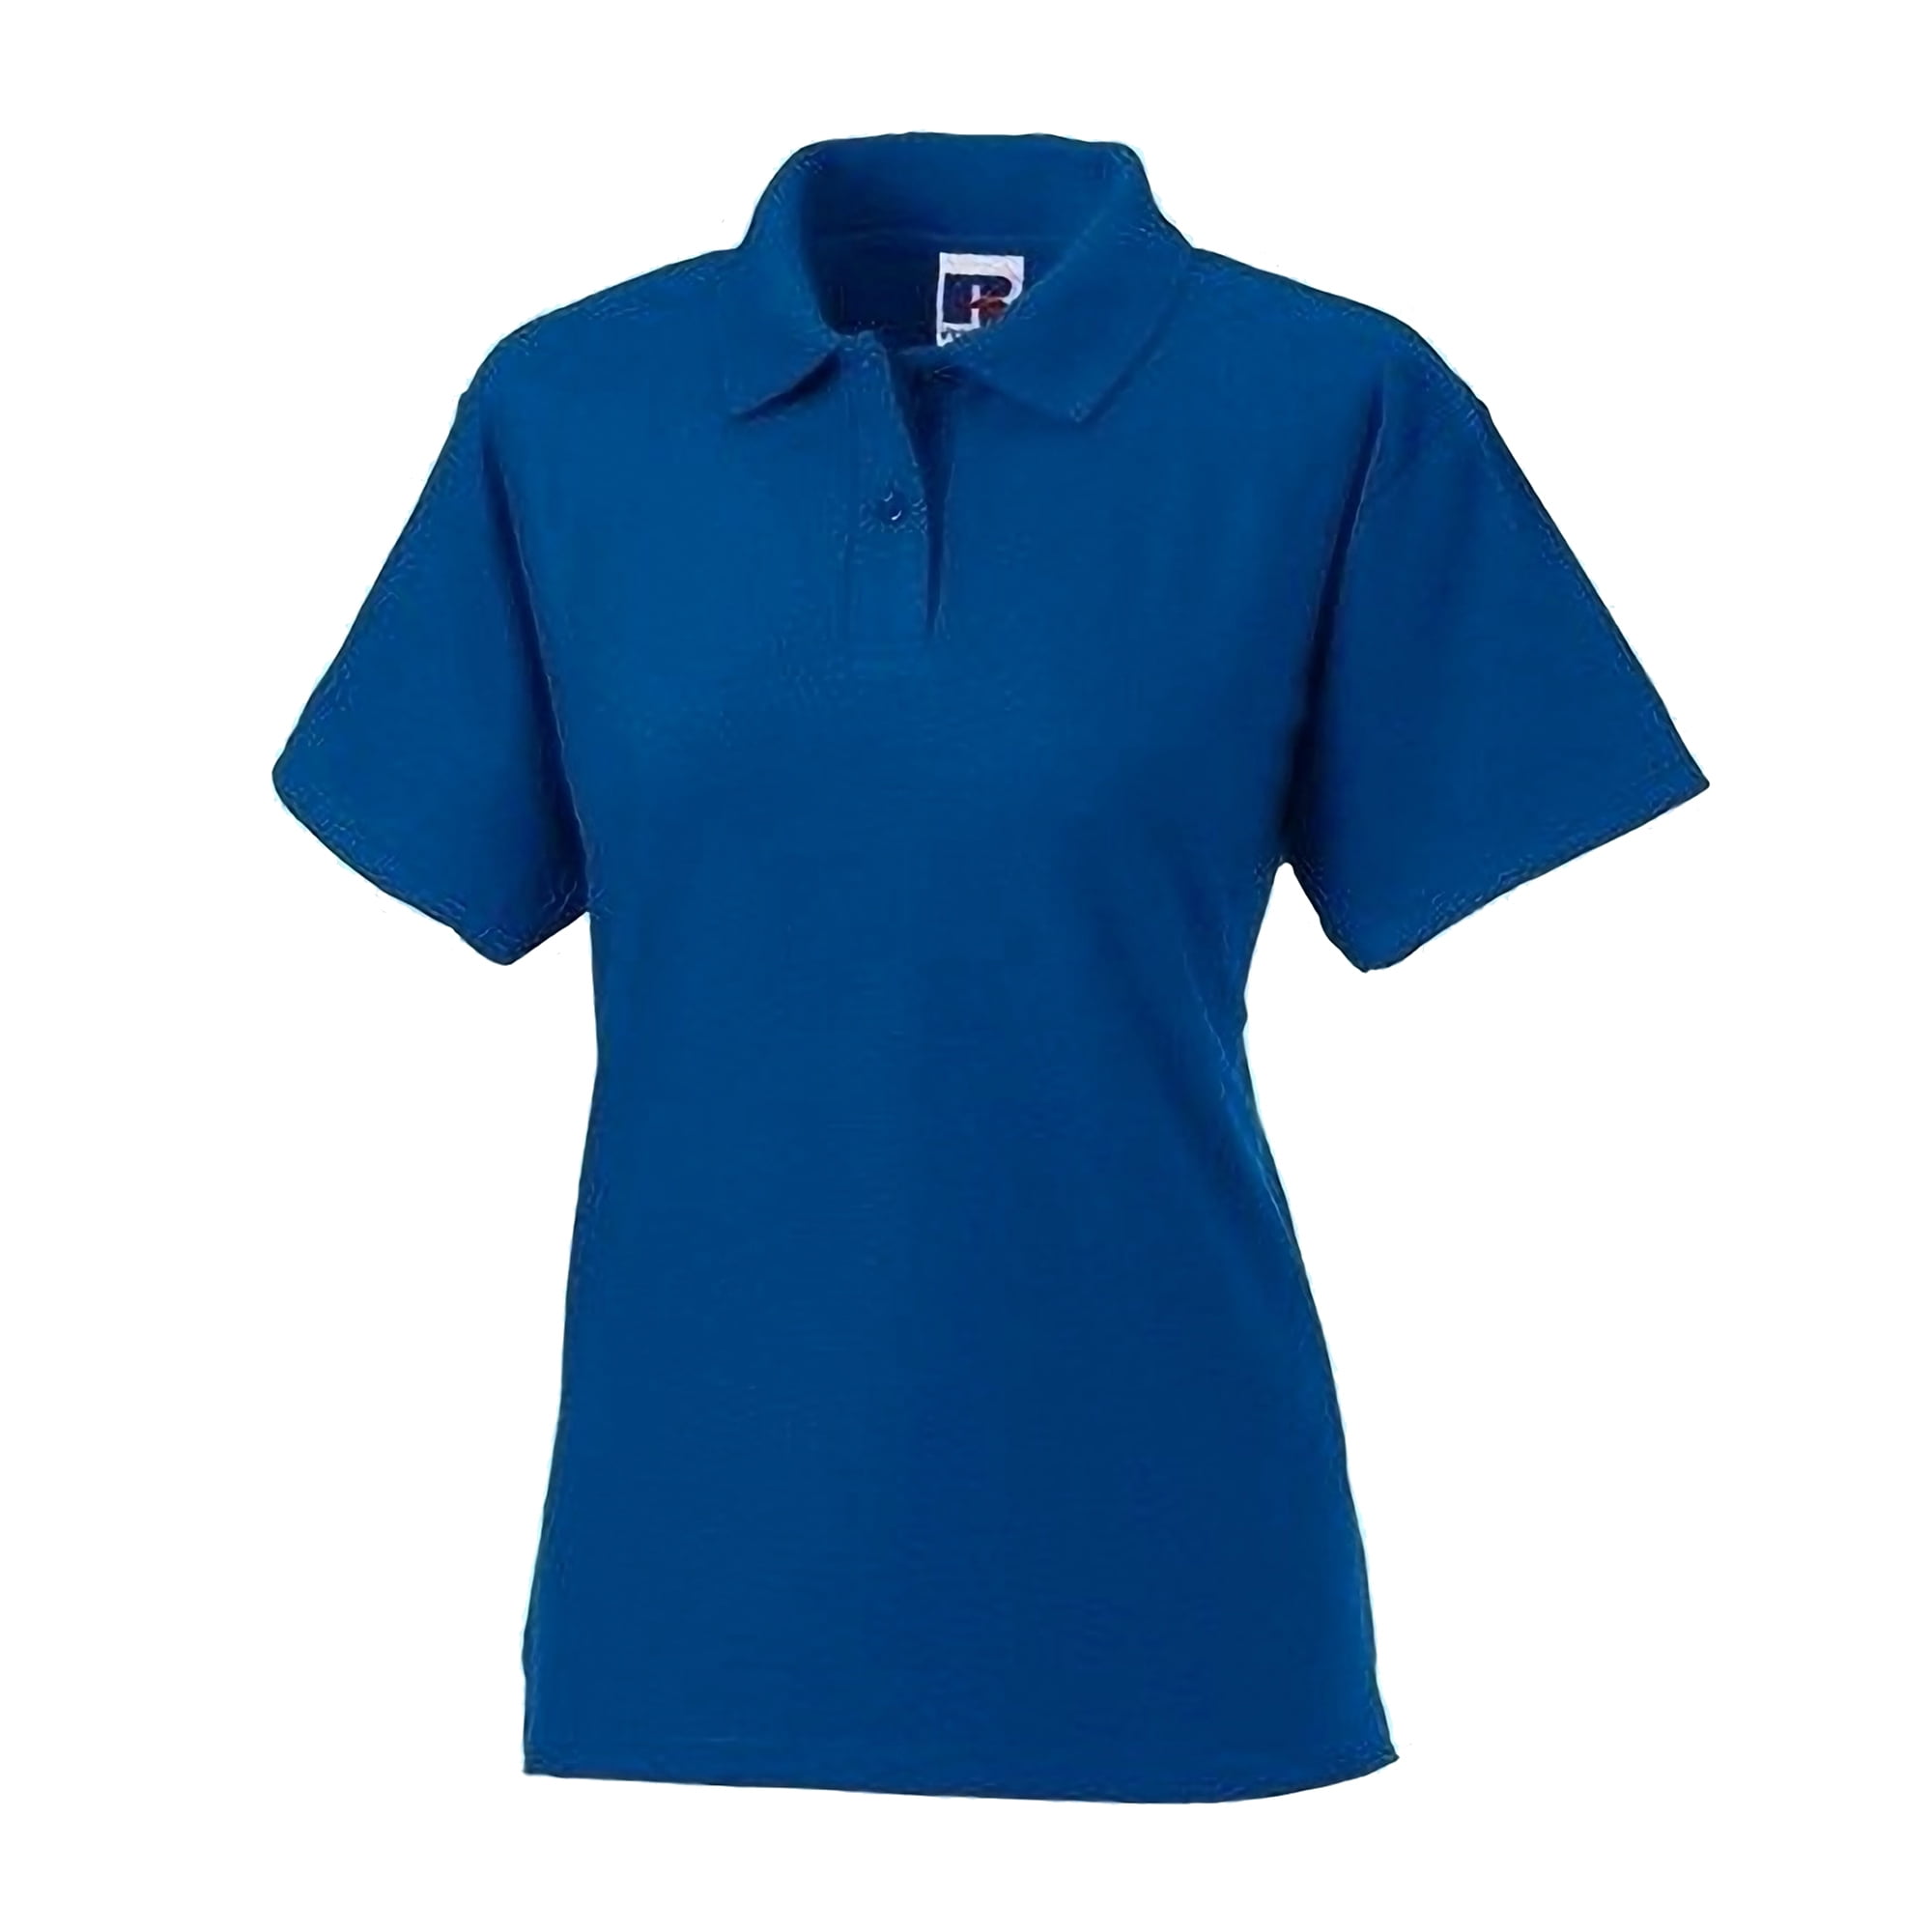 Jerzees Colours Ladies 65/35 Hard Wearing Pique Short Sleeve Polo Shirt 